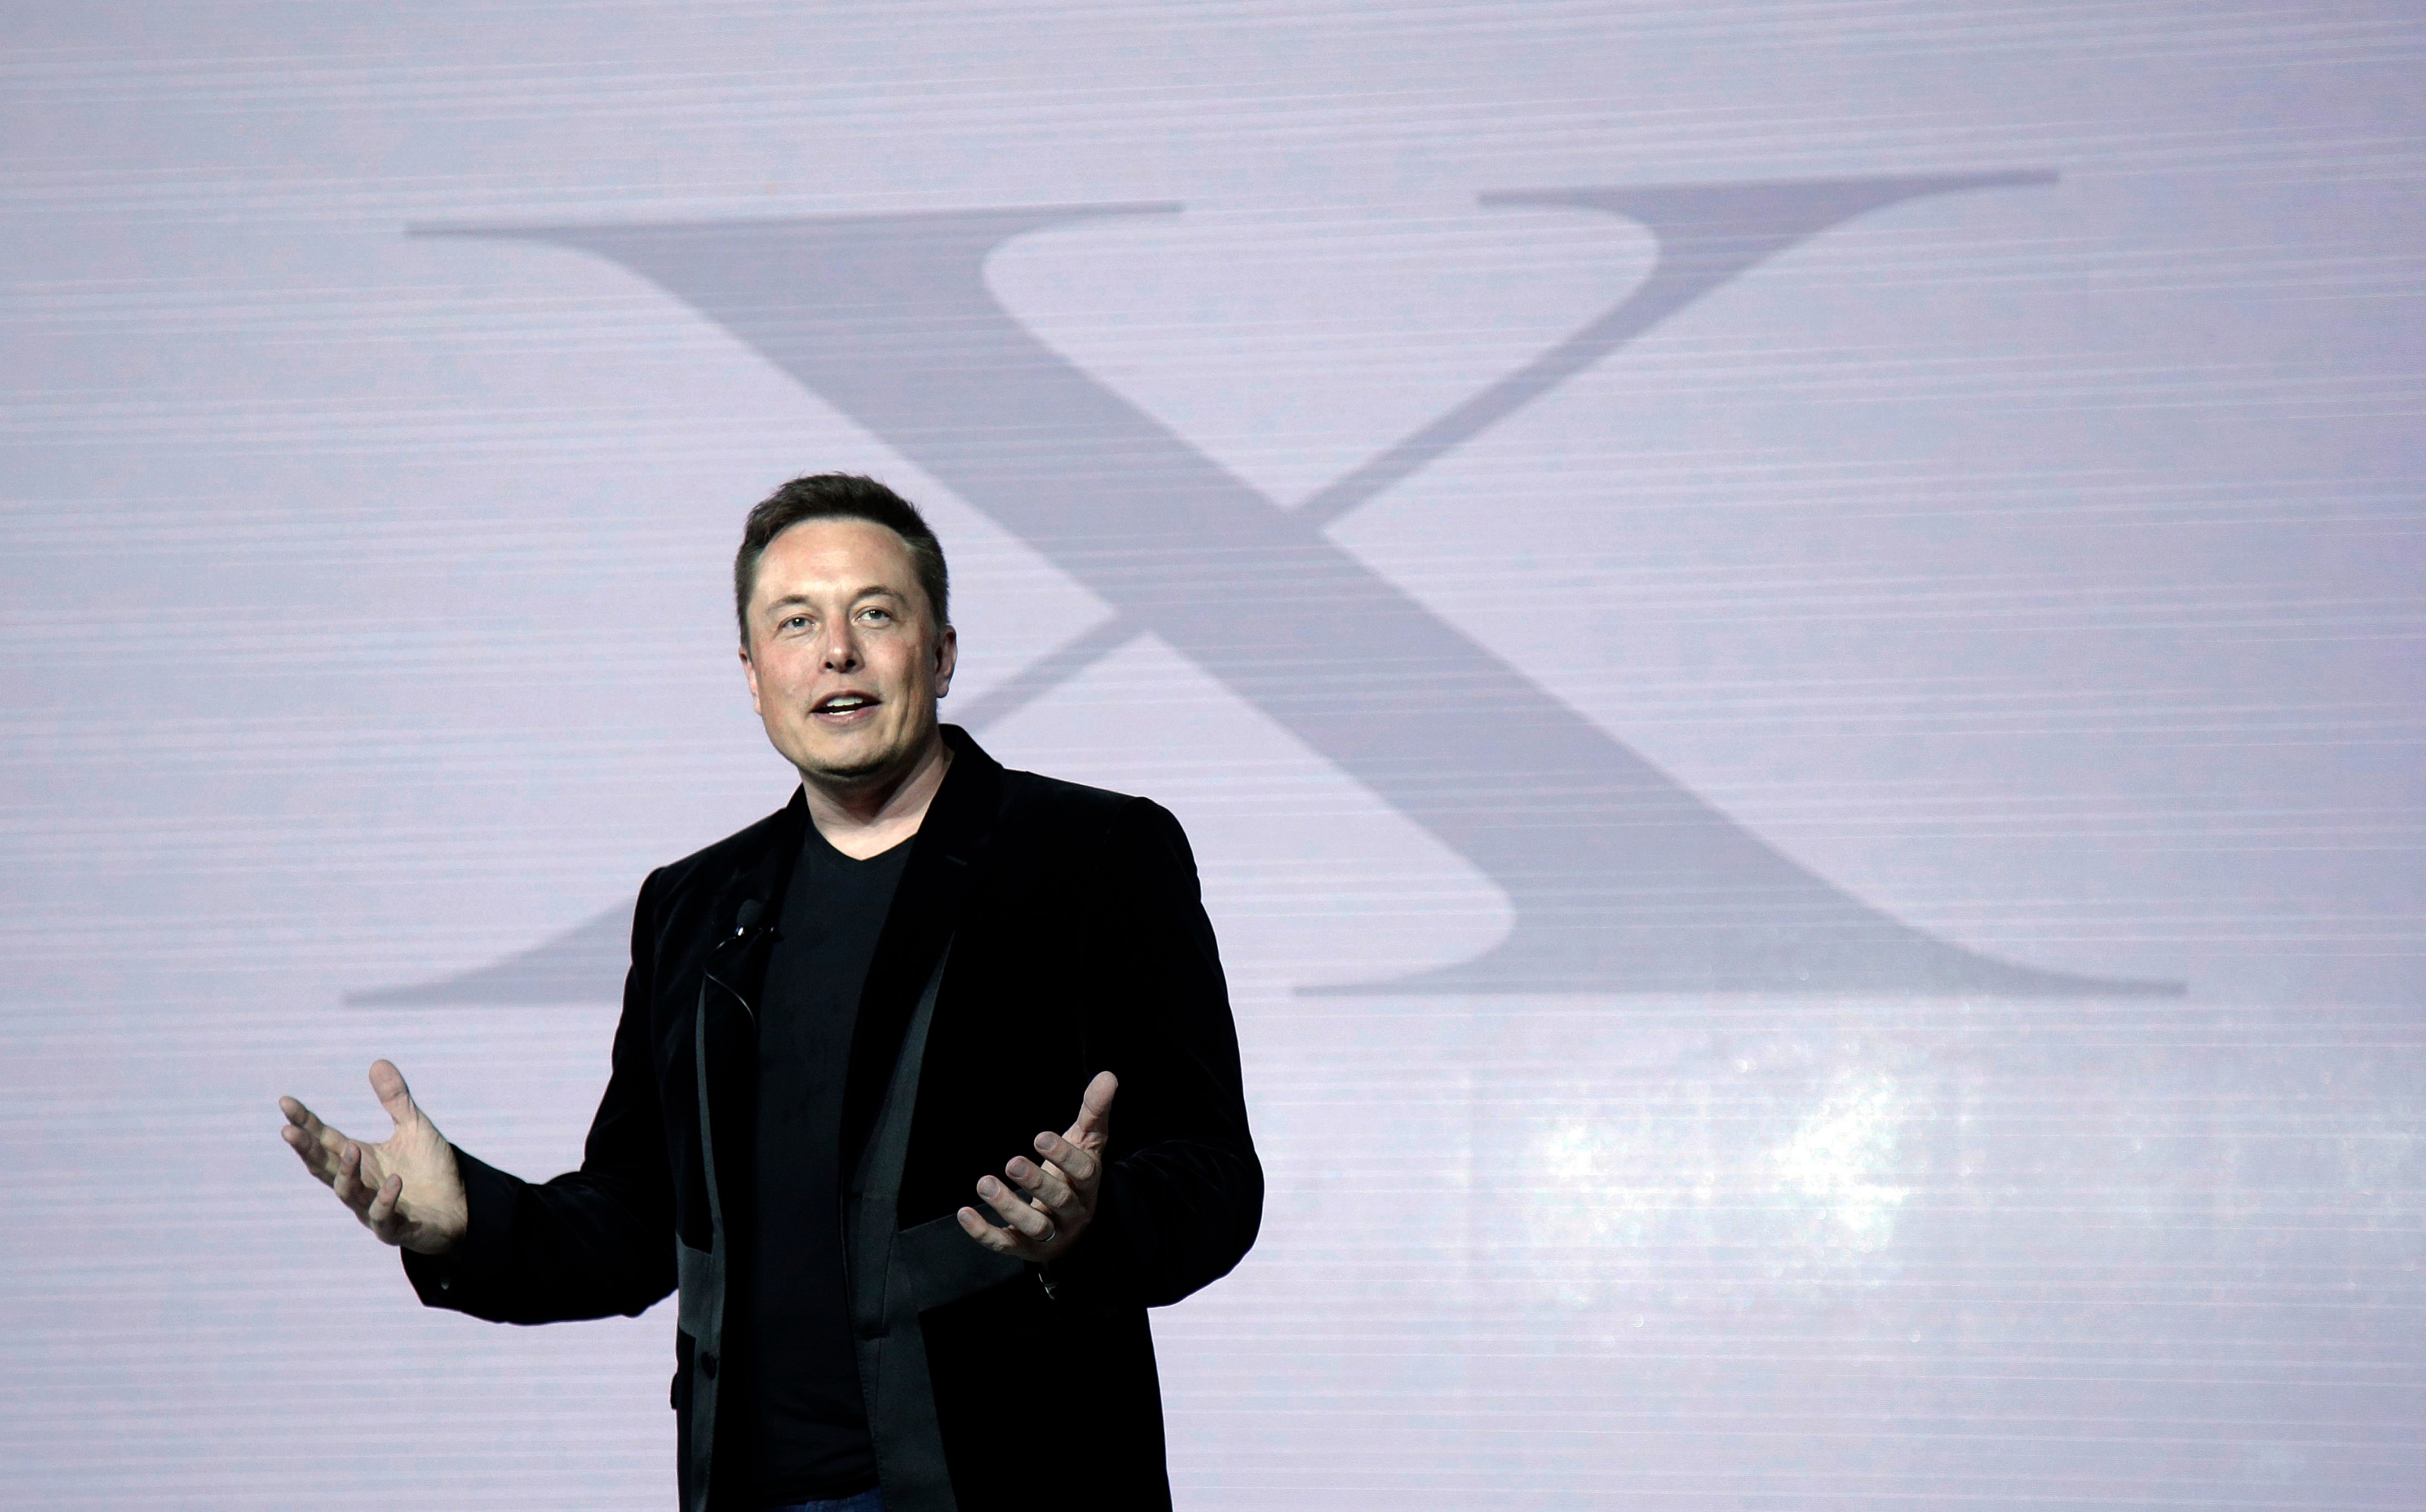 Can Tweets Become ‘X’s’? Elon Musk Takes on the Difficult Task of Changing Language